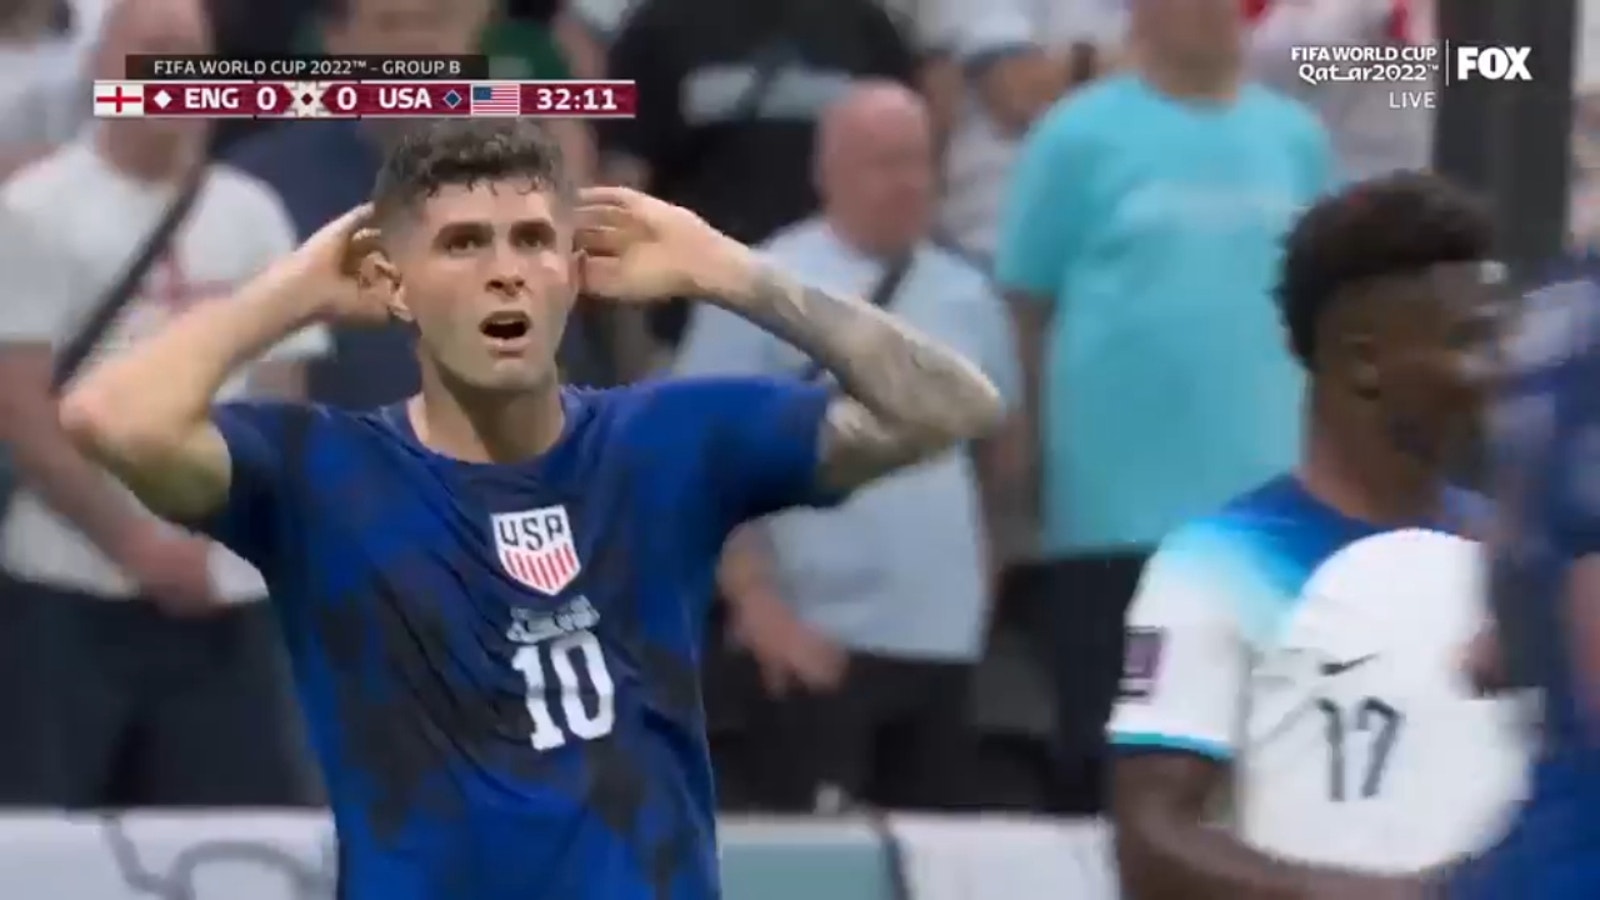 USA's Christian Pulisic's shot hits the crossbar against England